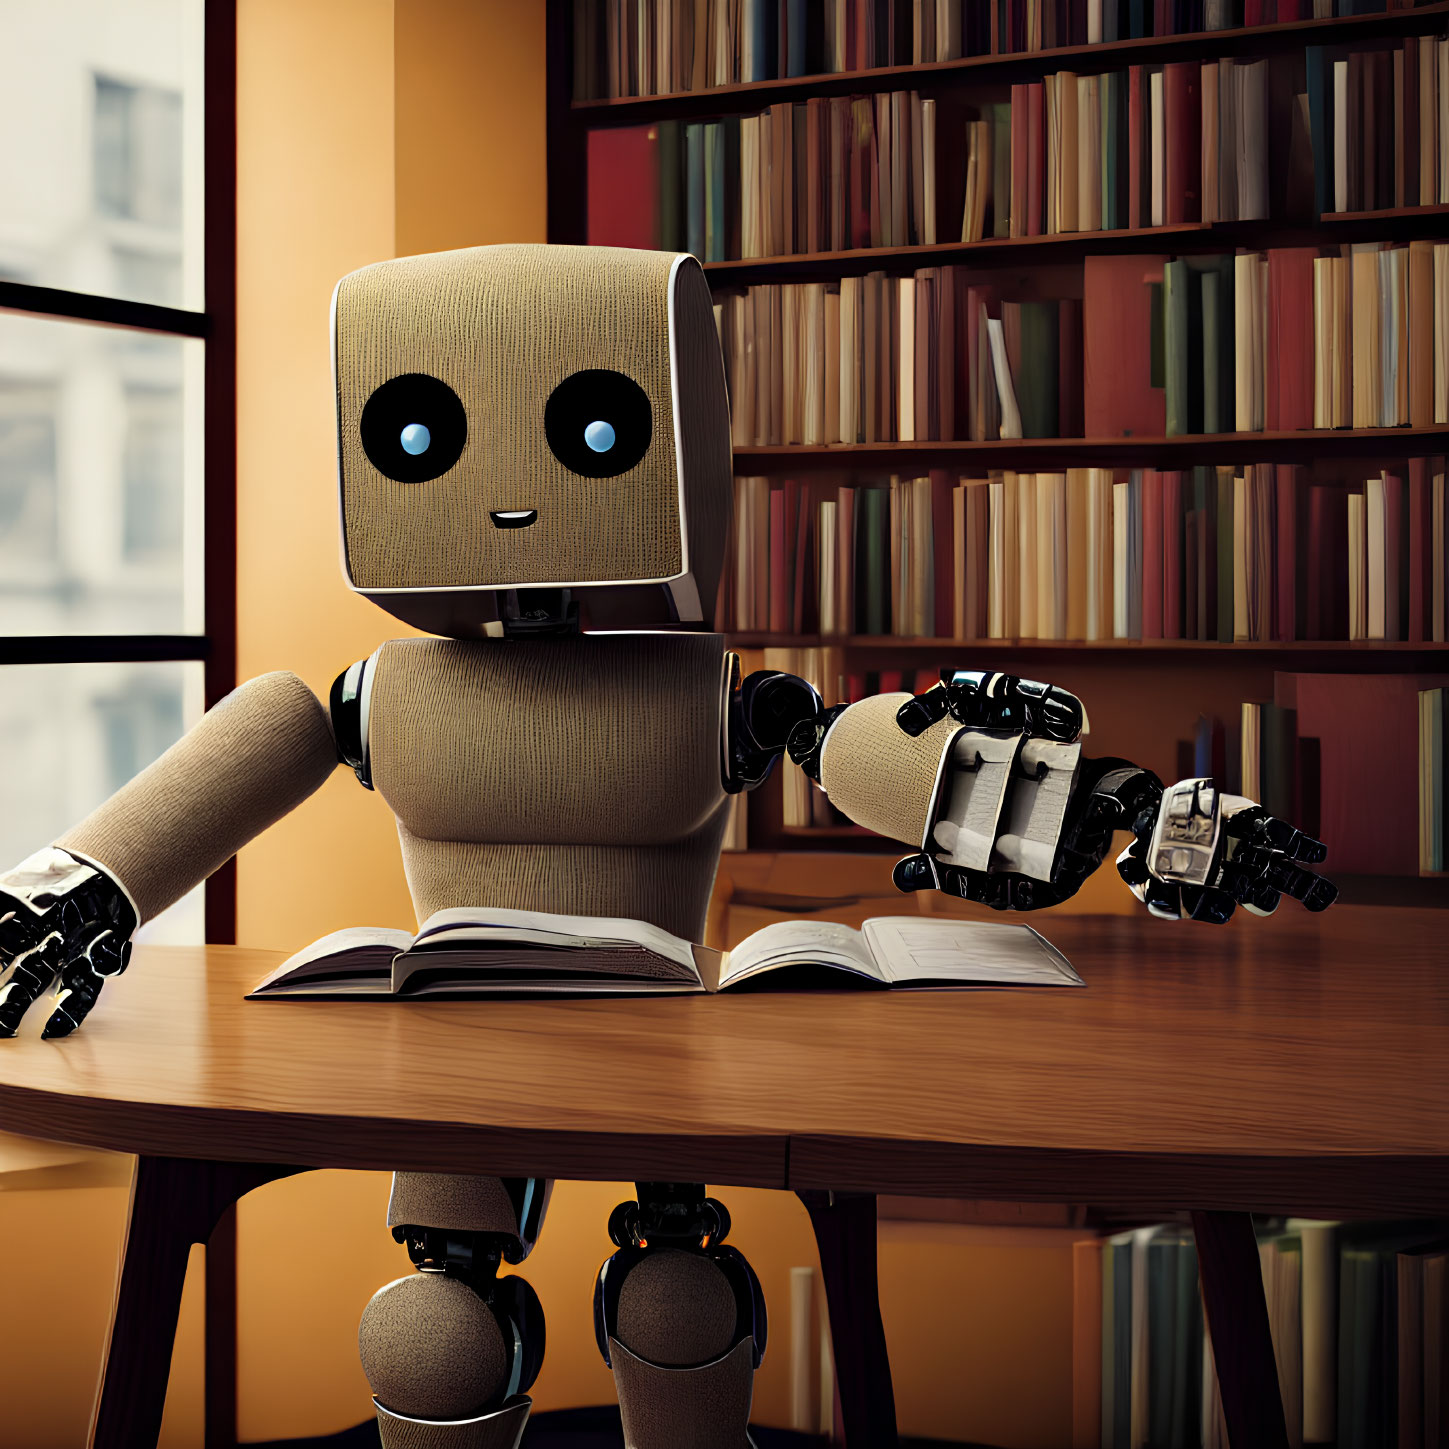 Humanoid robot reading book in room with bookshelves